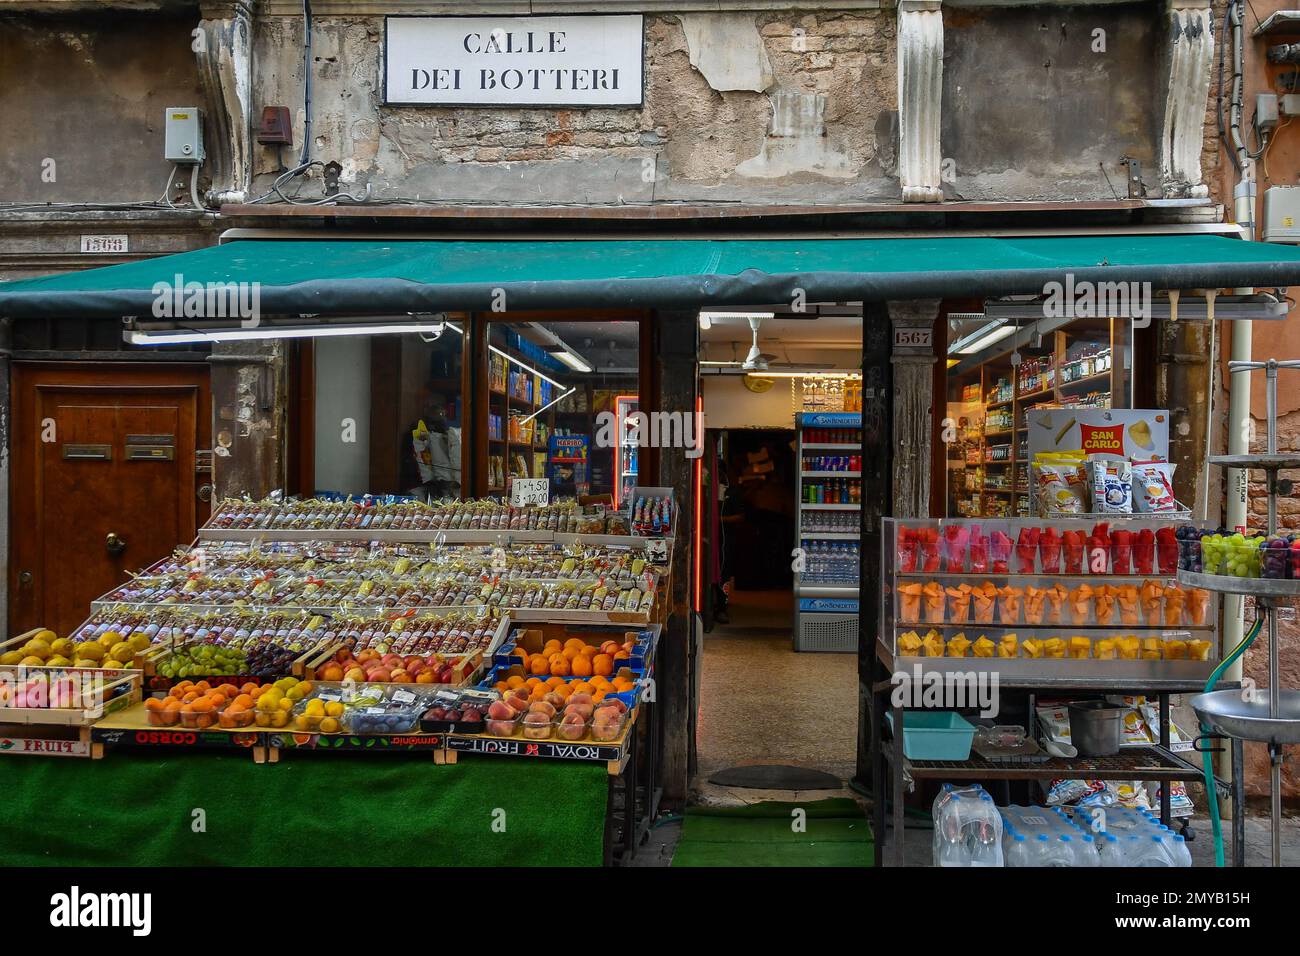 Exterior of a grocery shop with fresh fruit and fruit salad in takeaway plastic cups in Calle dei Botteri alley, Venice, Veneto, Italy Stock Photo